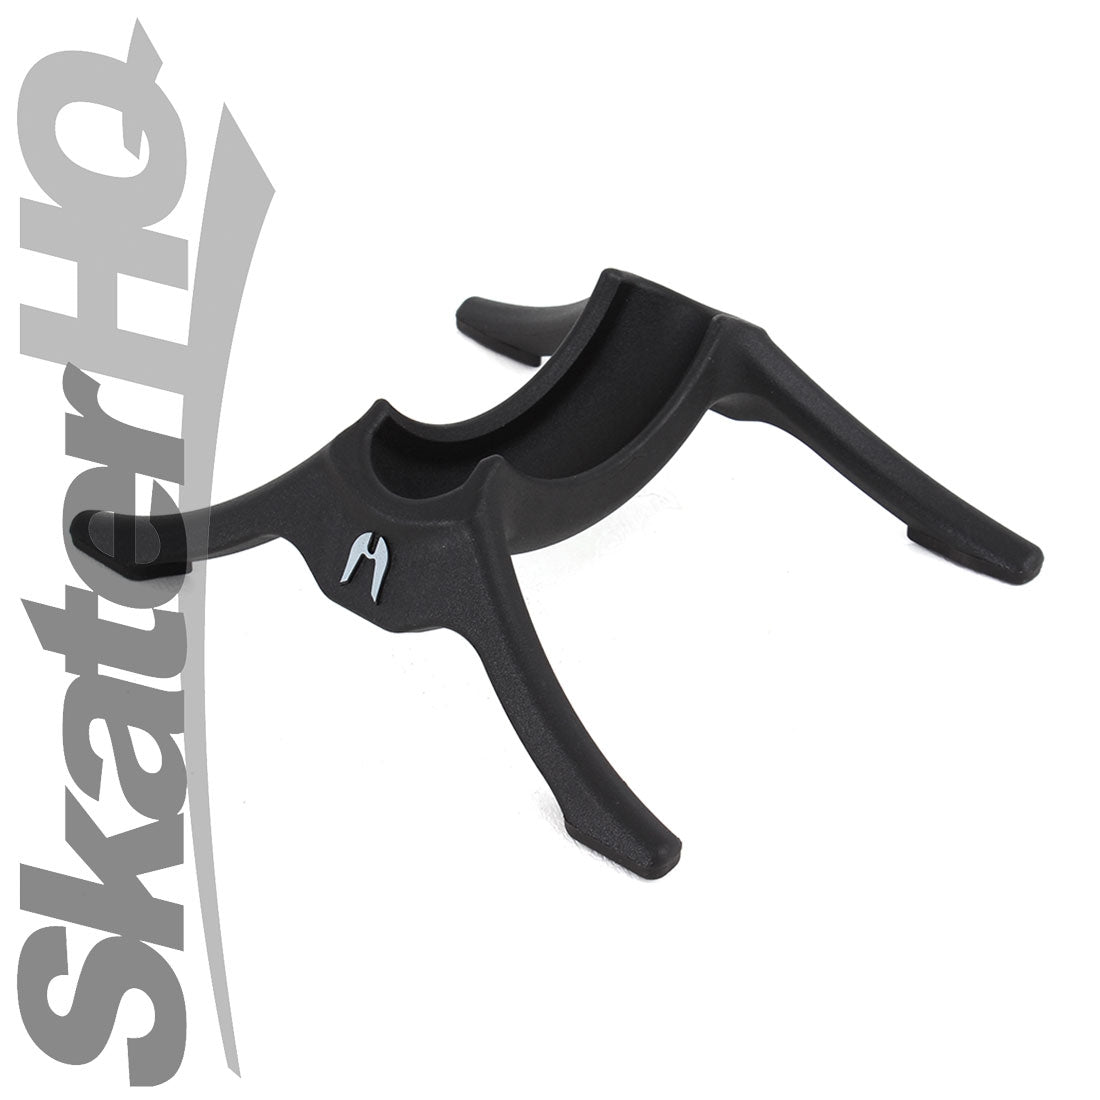 Ethic Scooter Stand 24mm - Black Scooter Hardware and Parts